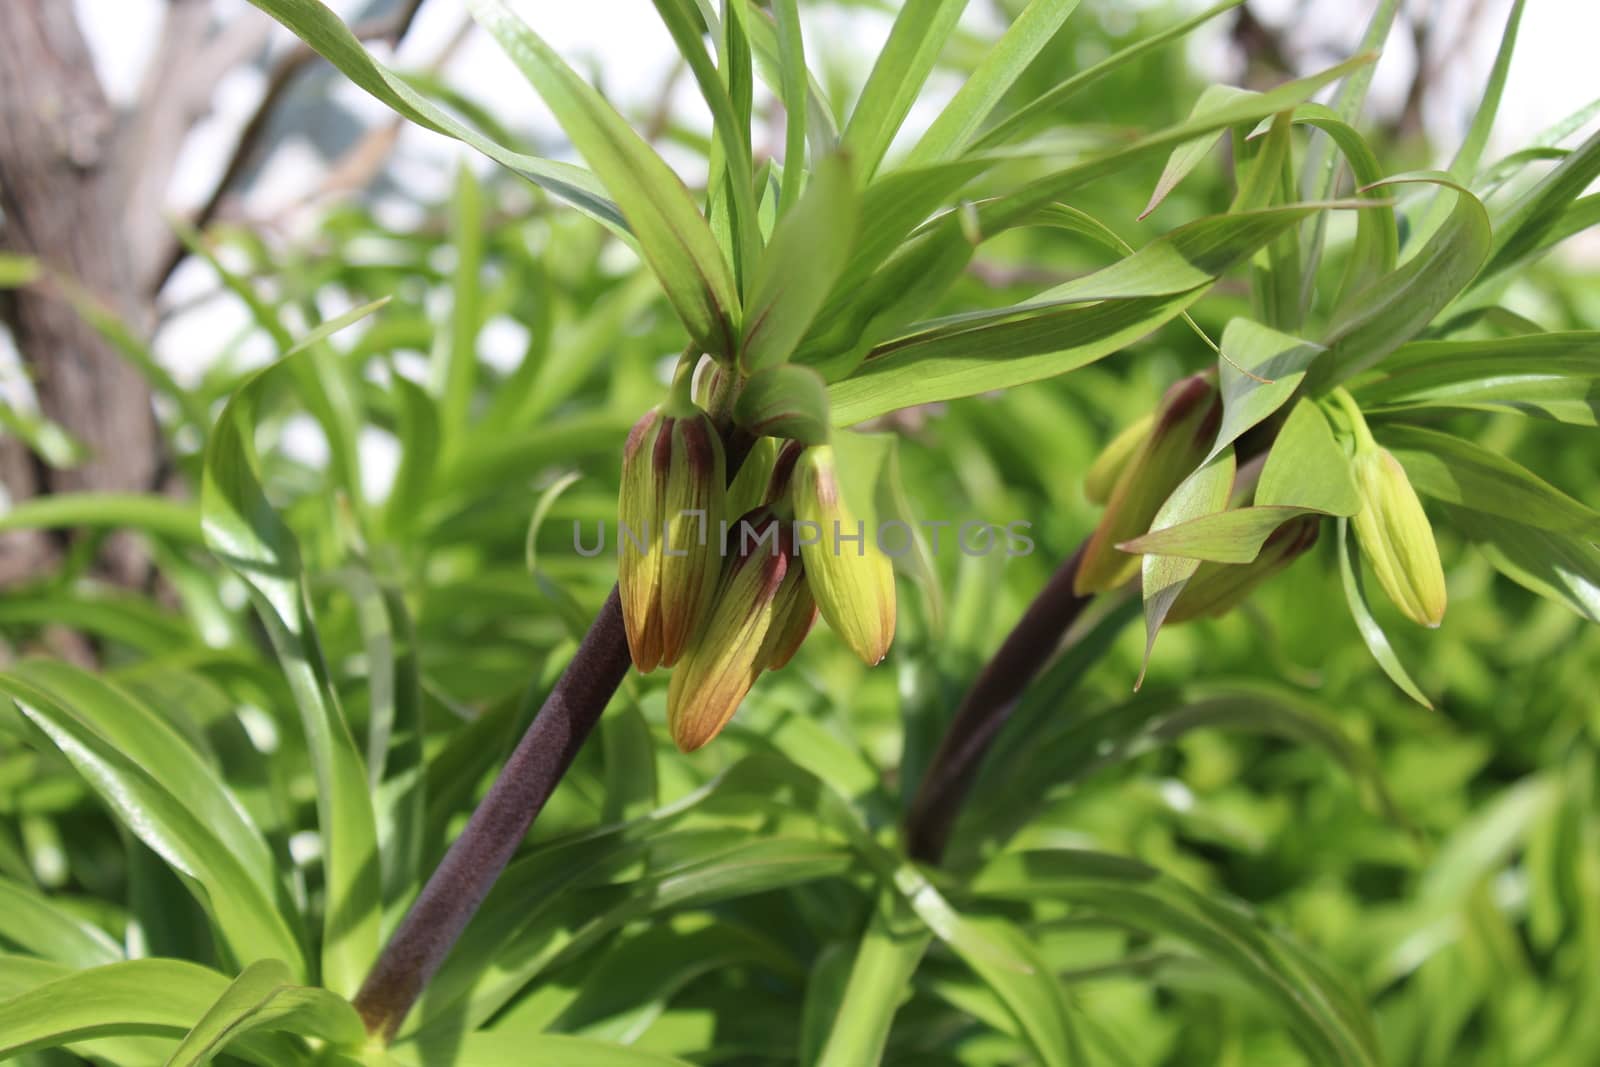 buds of the crown imperial by martina_unbehauen